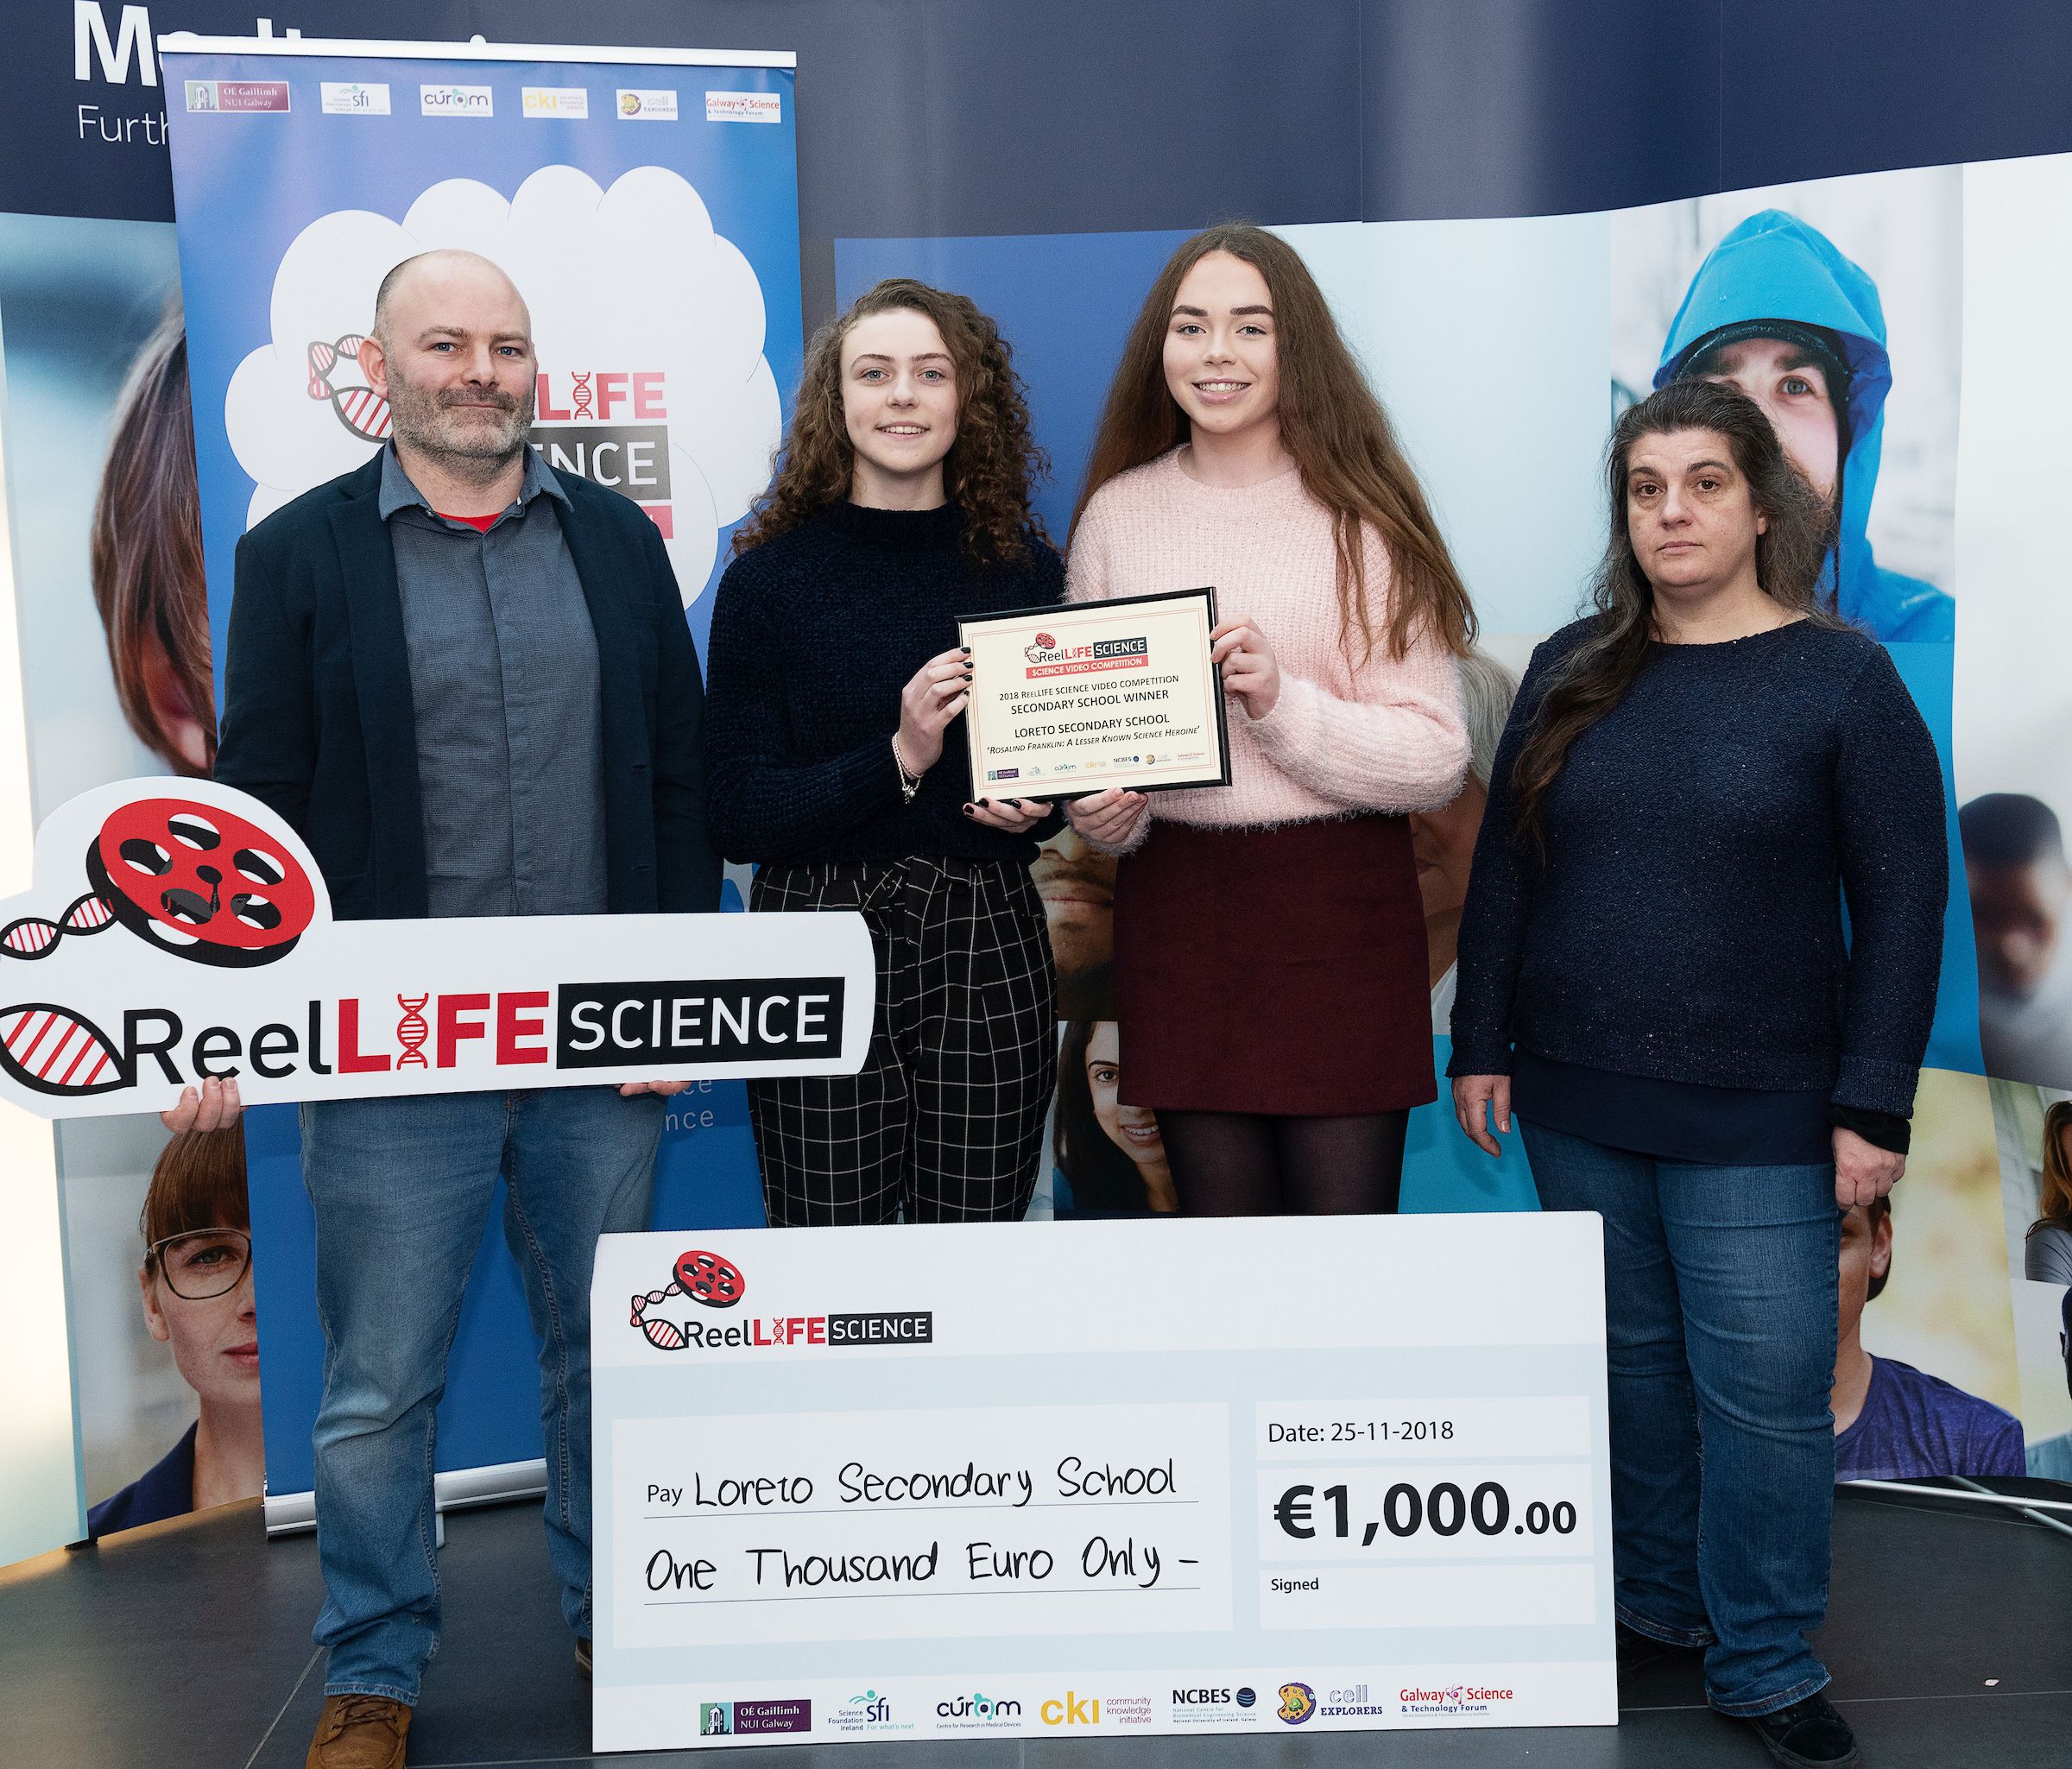 Kilkenny & Carlow schools collect prizes in nationwide ReelLIFE Science  video competition